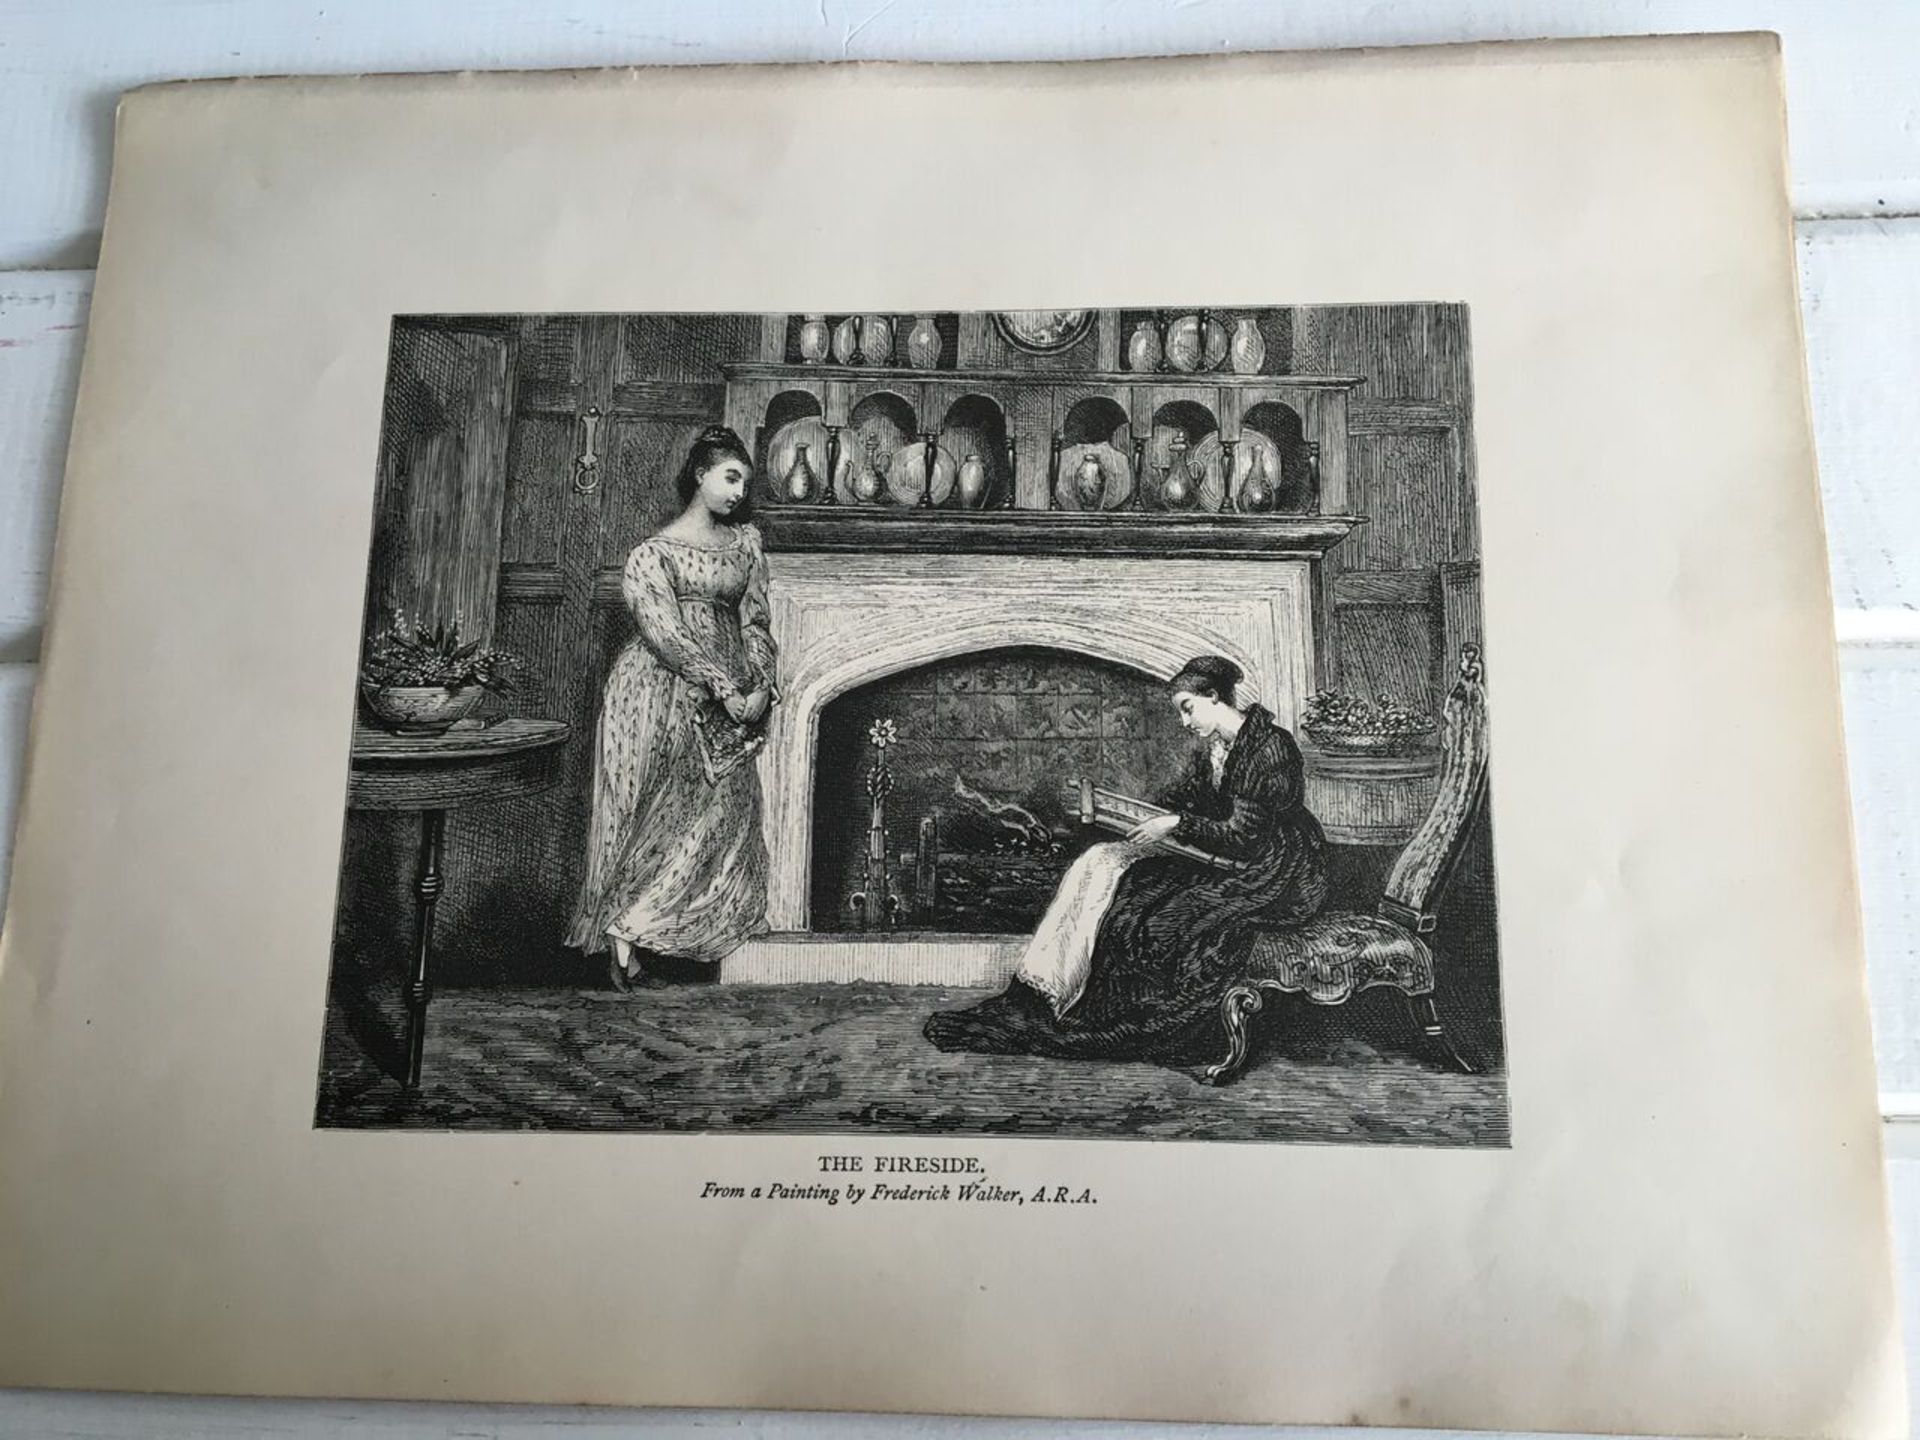 AN ENGRAVING c1900 OF A PAINTING BY FREDERICK WALKER (1740 - 1875 ). "THE FIRESIDE". Engraved on